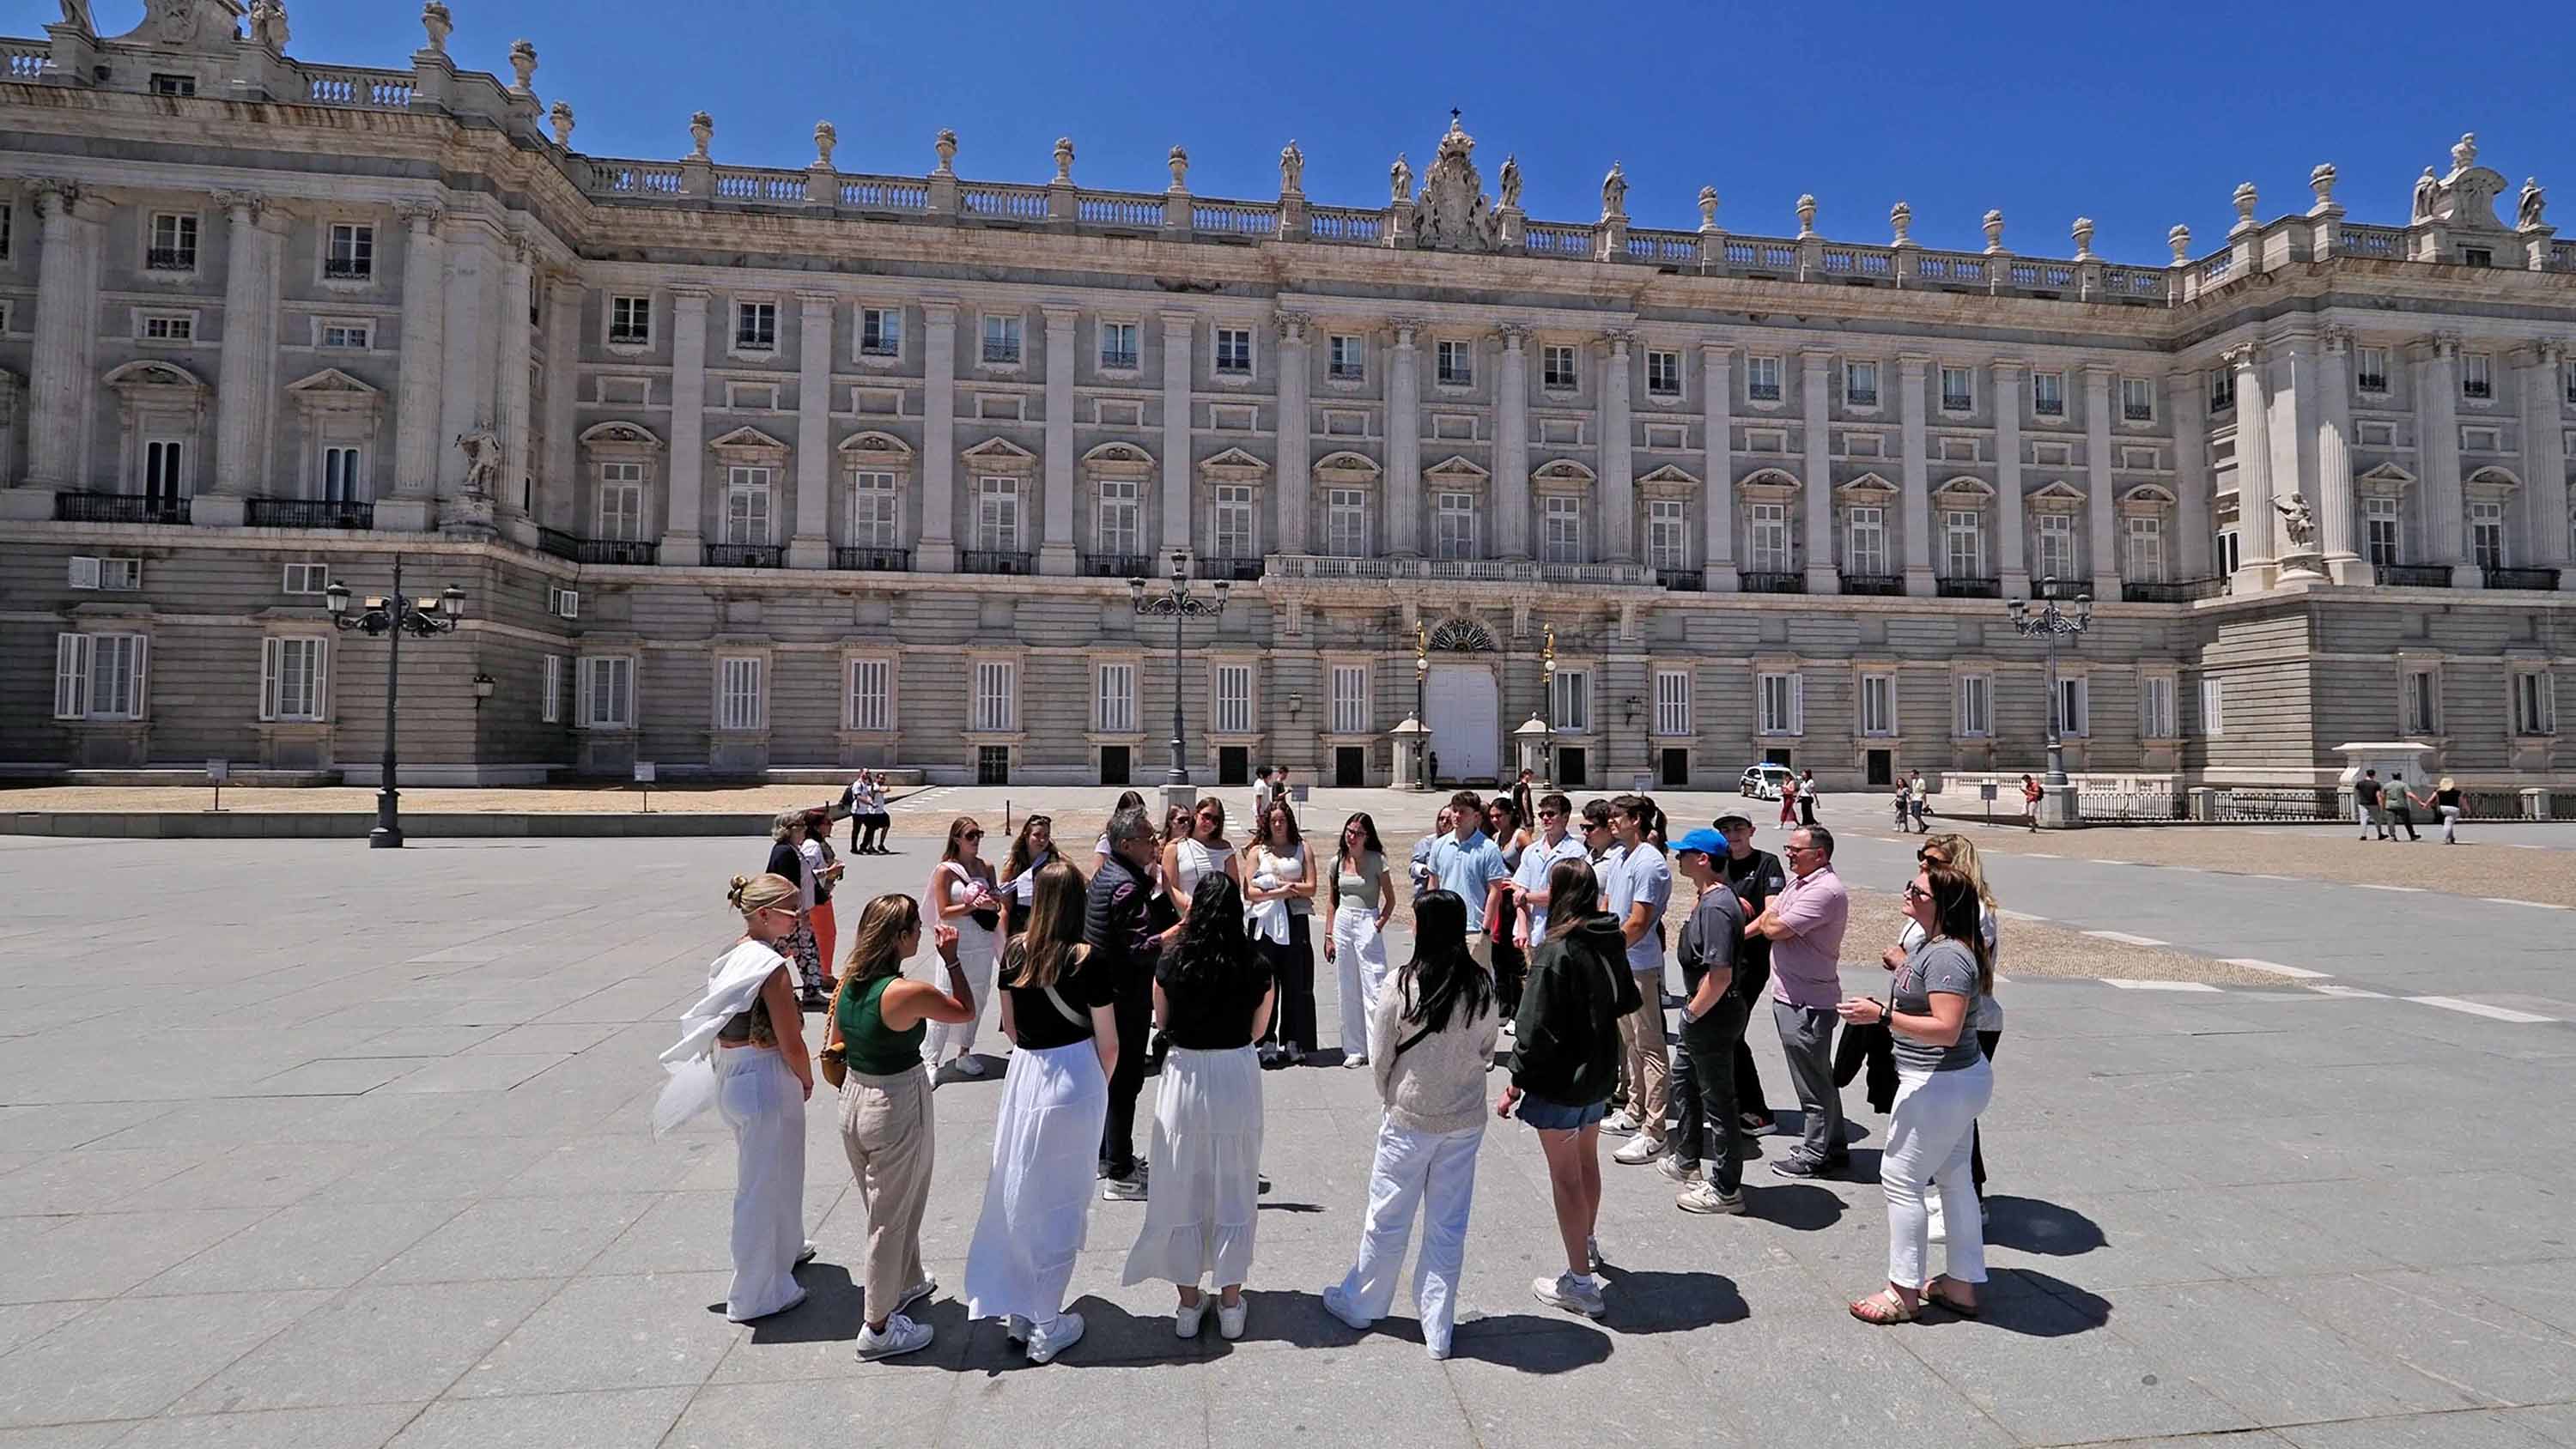 Students outside the Royal Palace of Madrid